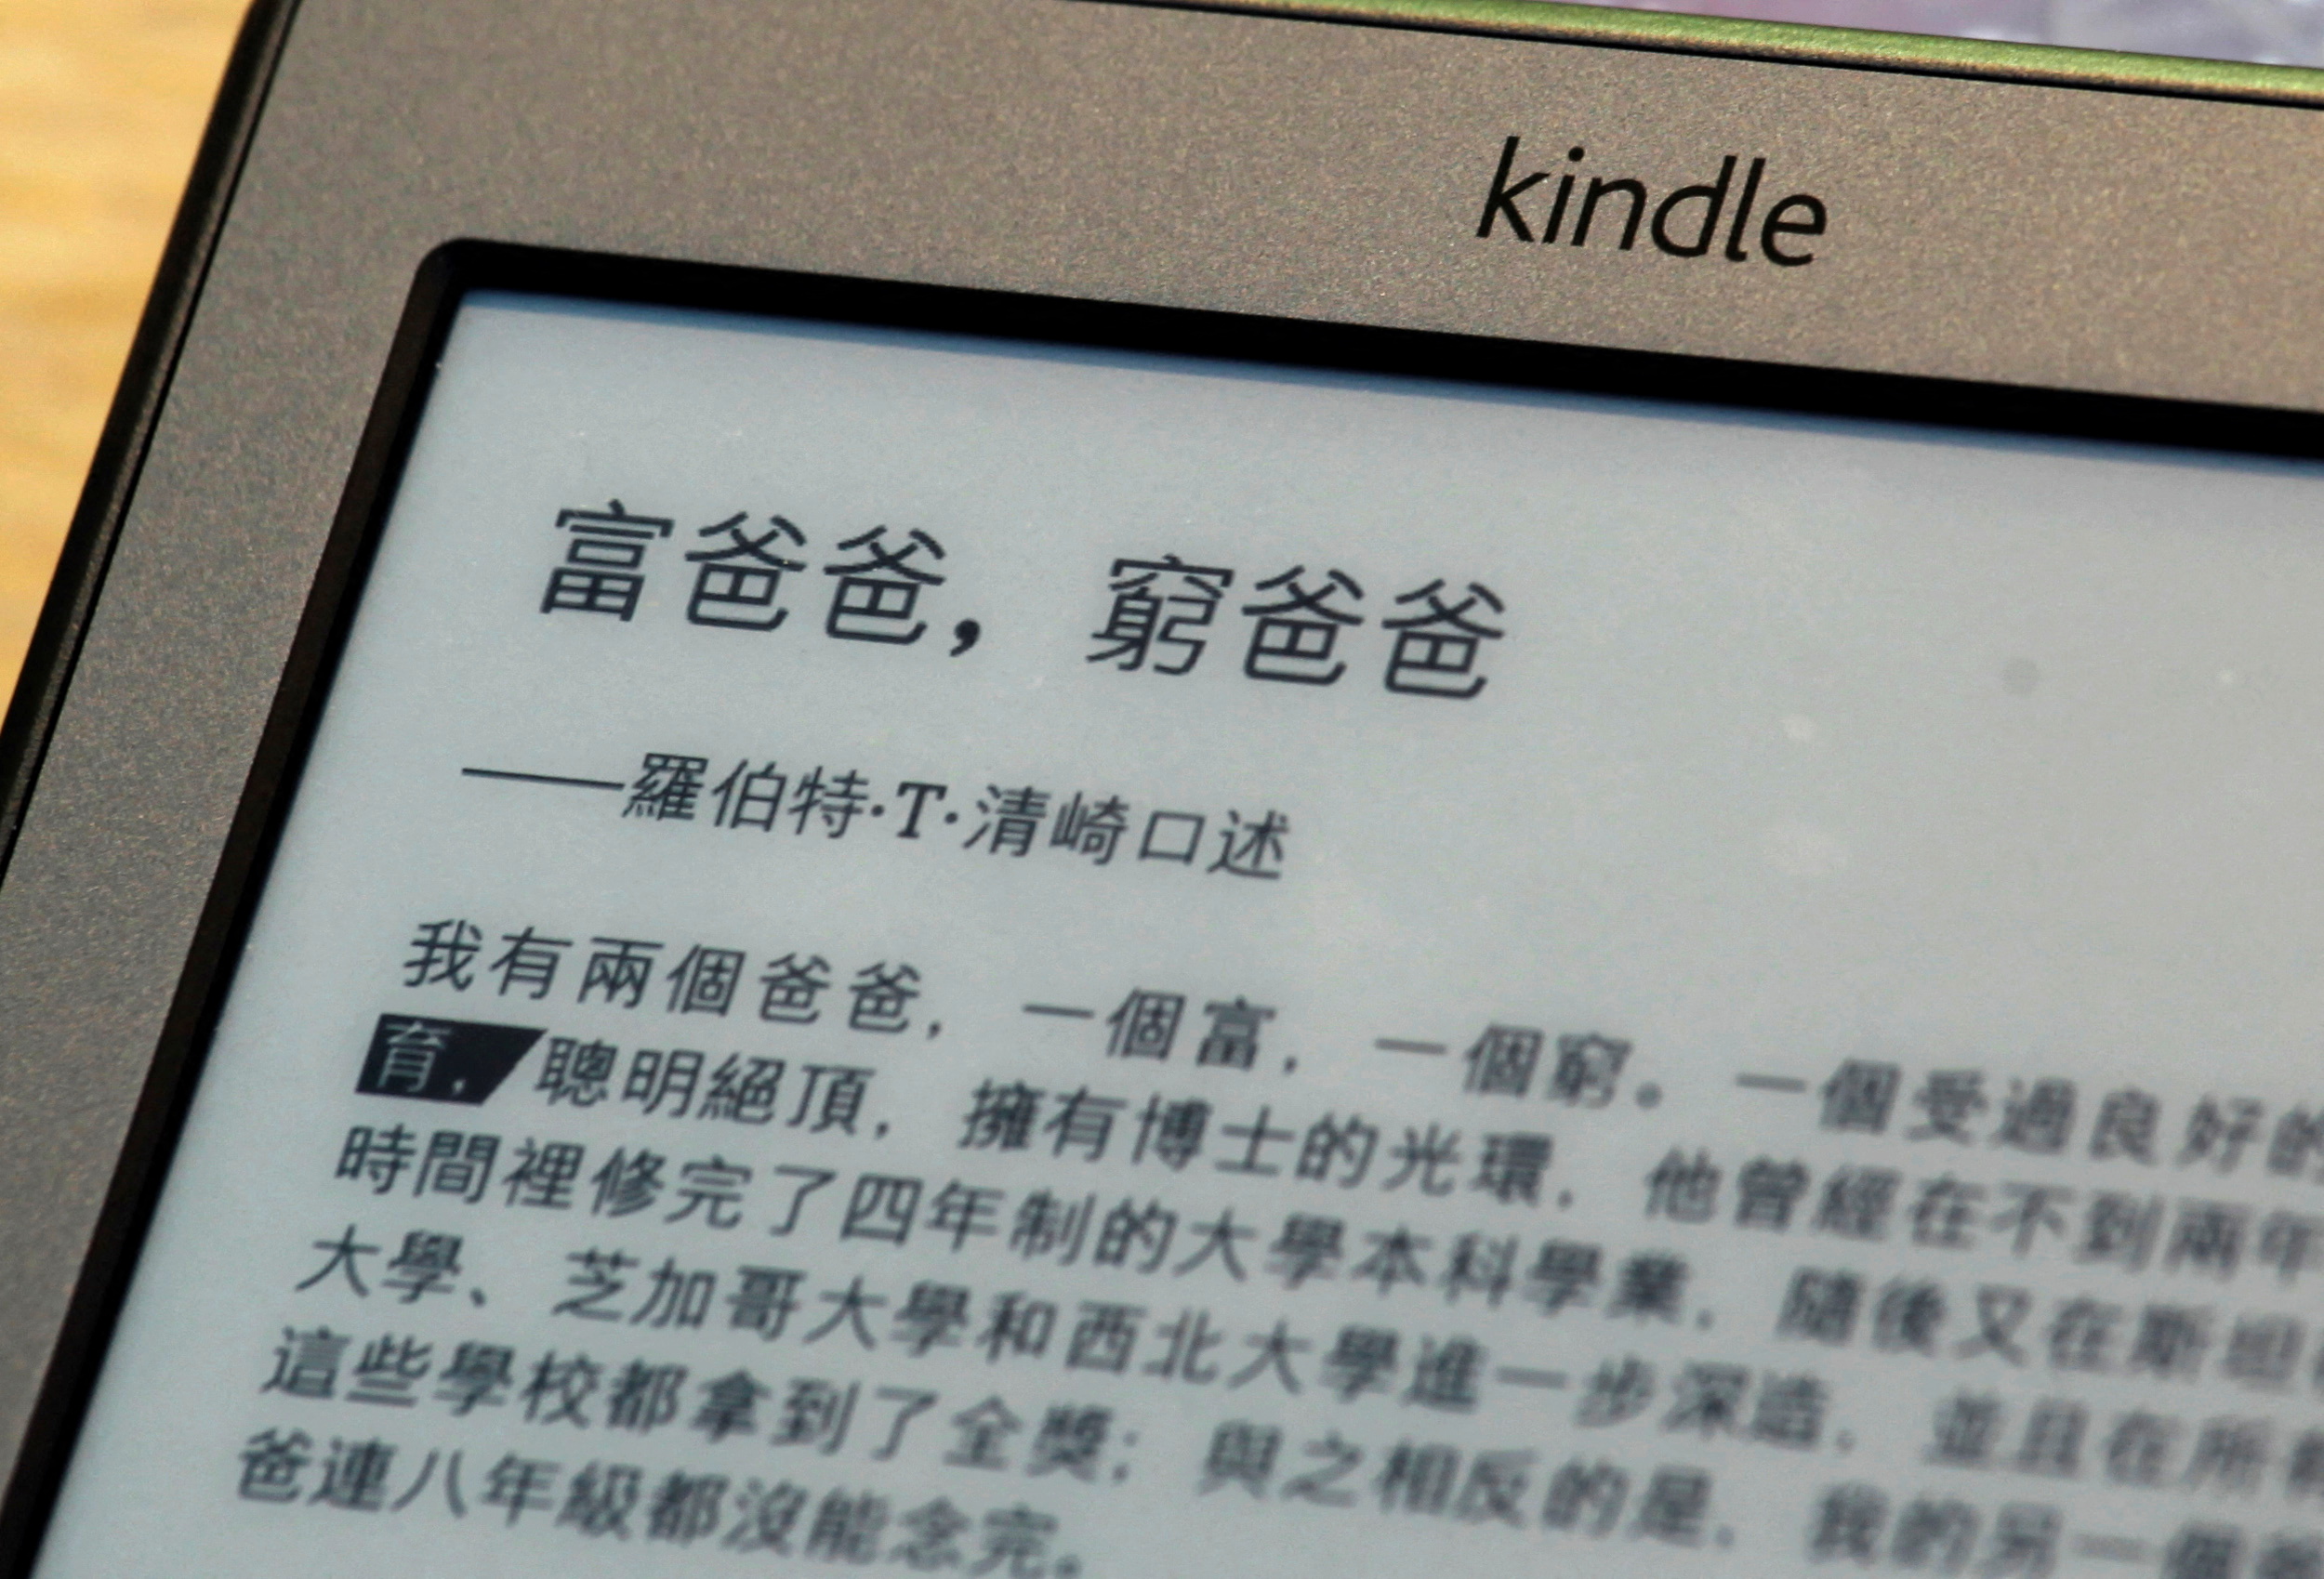 An Amazon Kindle displays a section of the Chinese edition of 